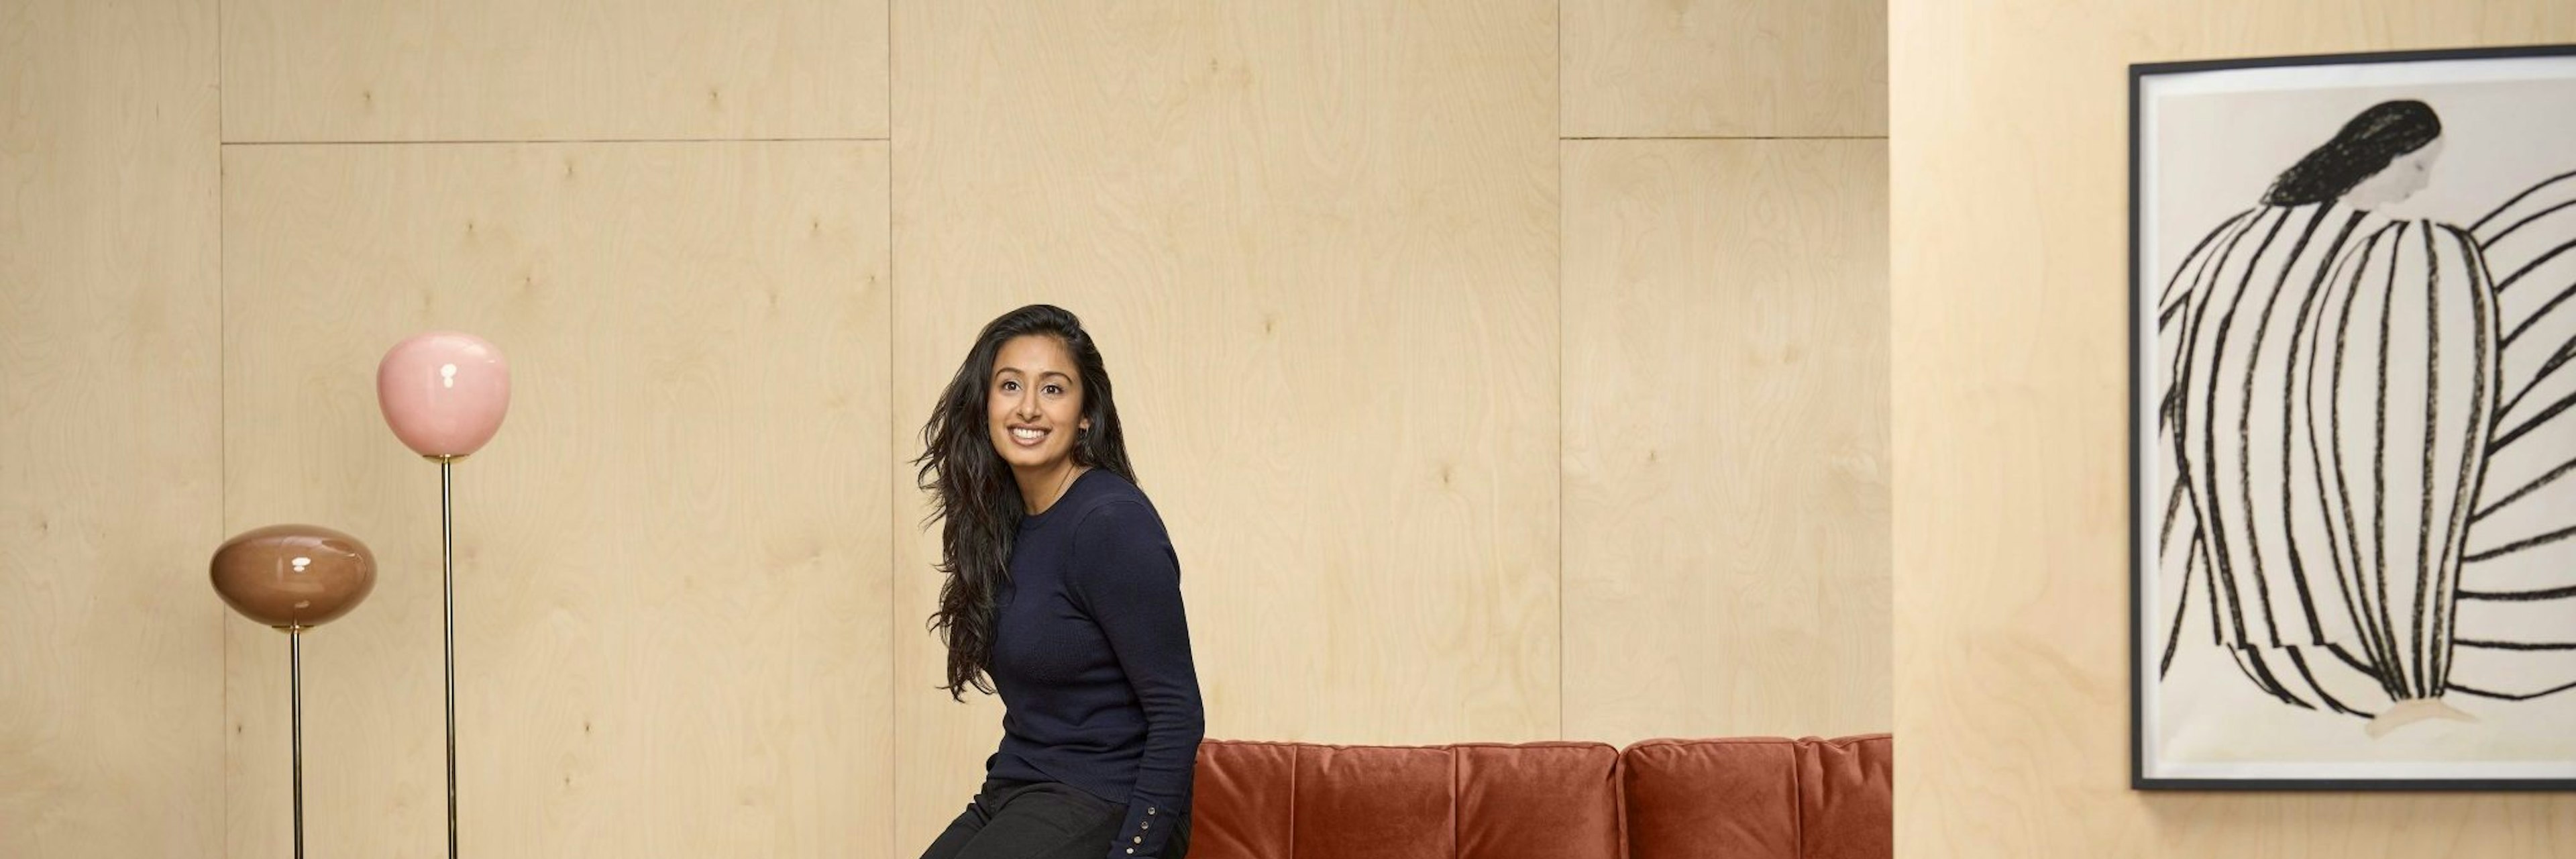 An image of COO of Trouva Dimple Patel leaning on a sofa